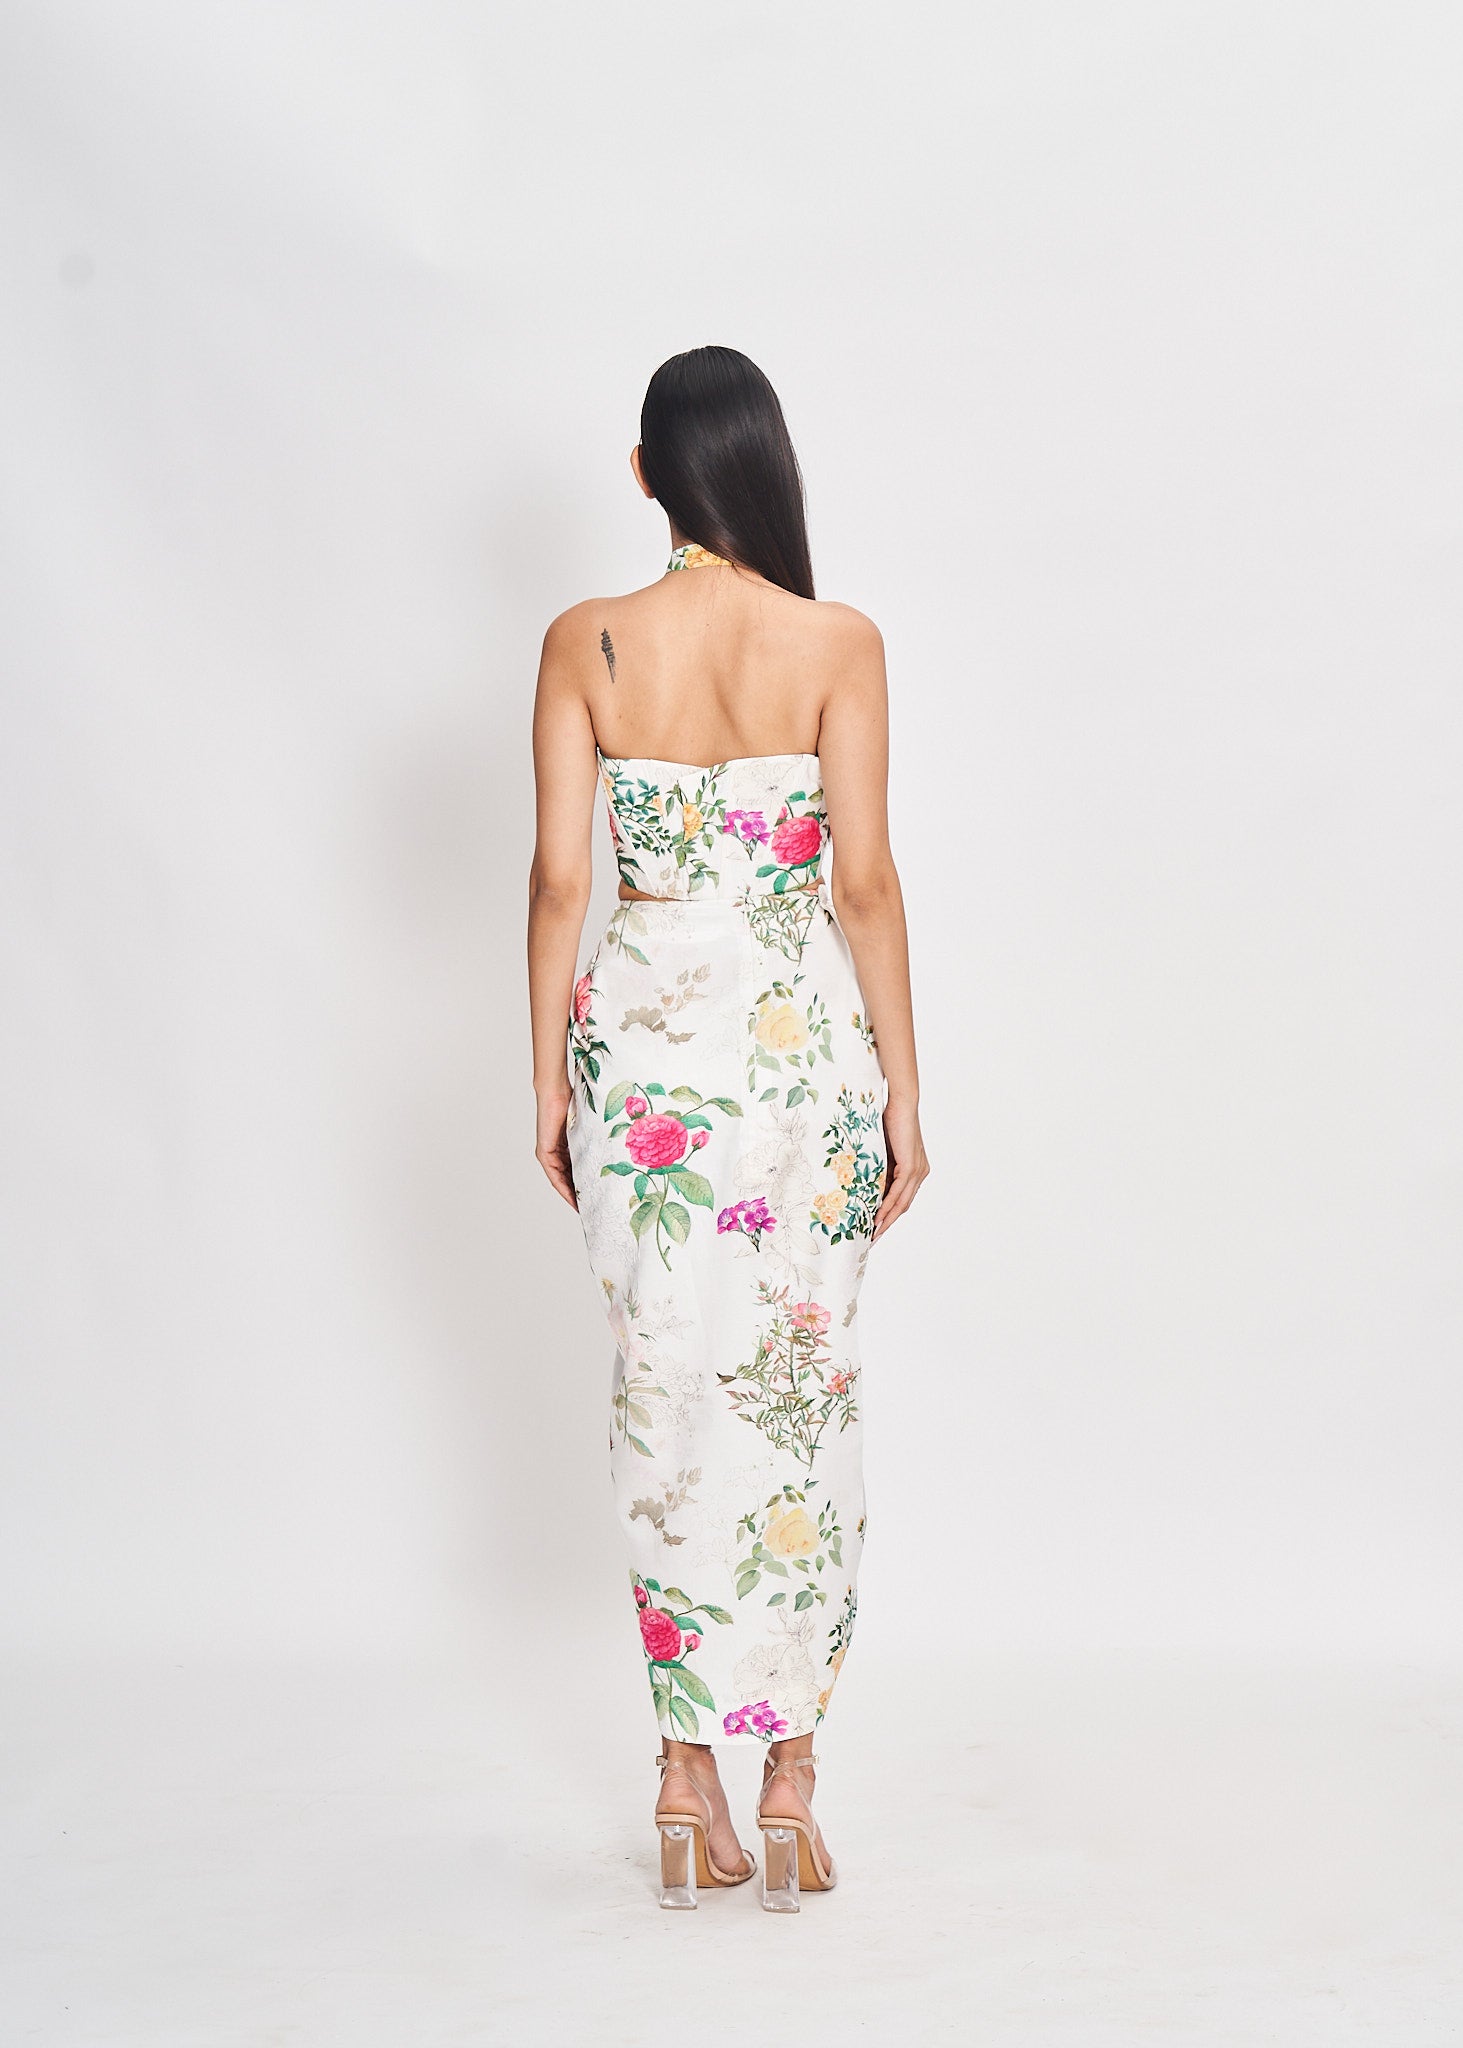 Fleur and Foliage in Pearl Printed Draped Skirt